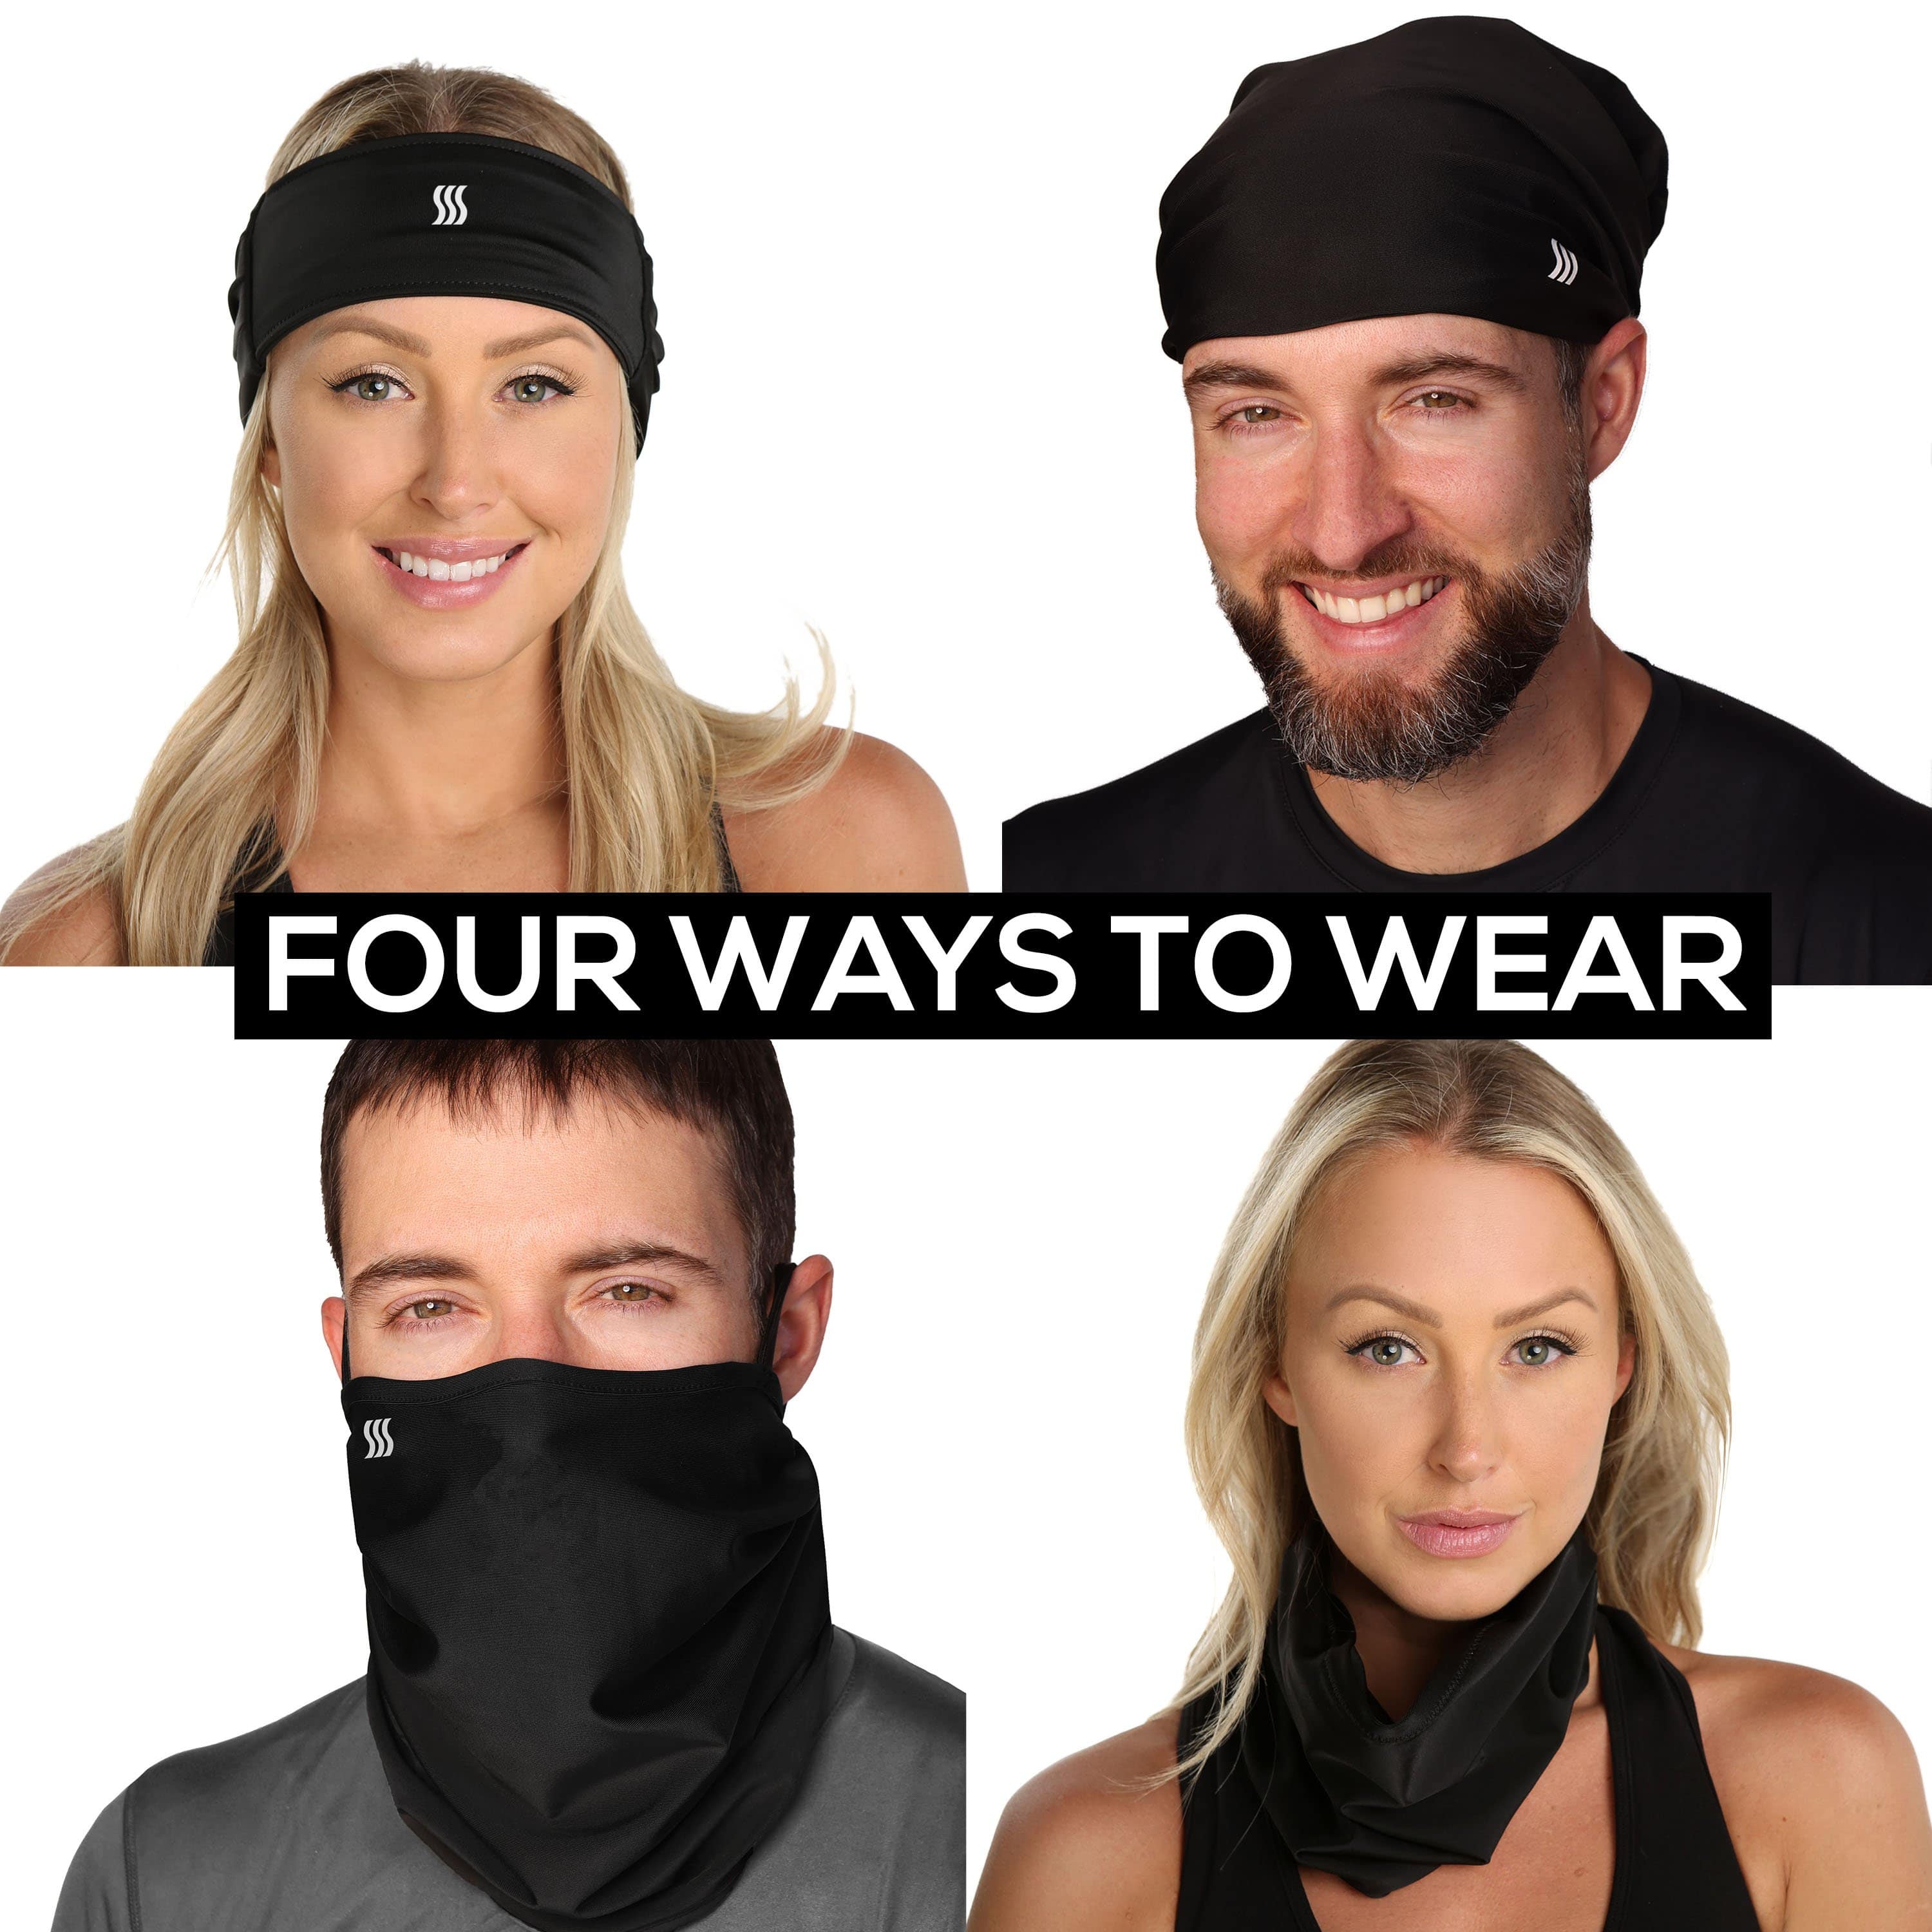 Wear this accessory as a headband, do rag, neck gaiter, or face mask.